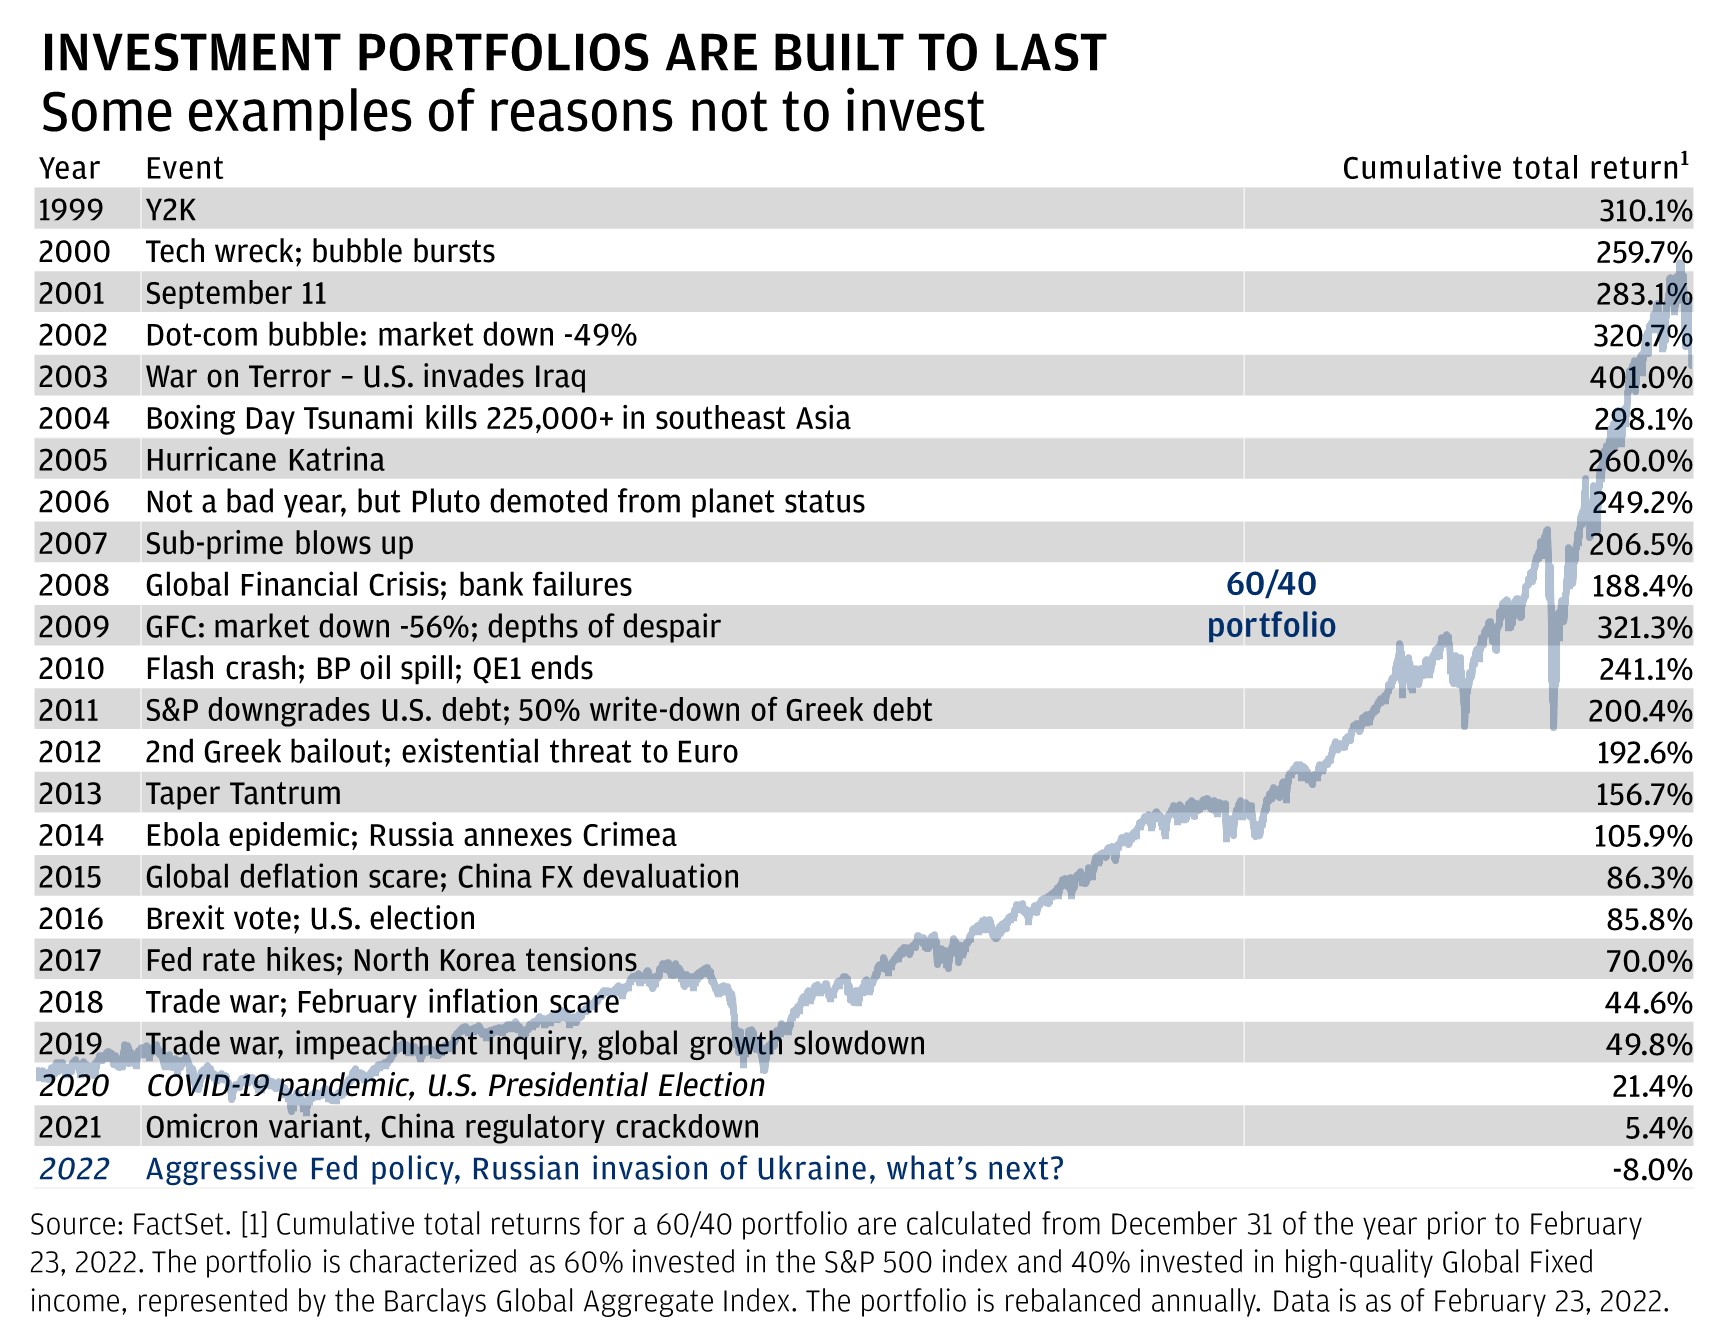 INVESTMENT PORTFOLIOS ARE BUILT TO LAST, but there are some examples of reasons not to invest. This chart shows the value of a $100,000 investment in a 60/40 portfolio from January 1, 1999, to February 23, 2022. 